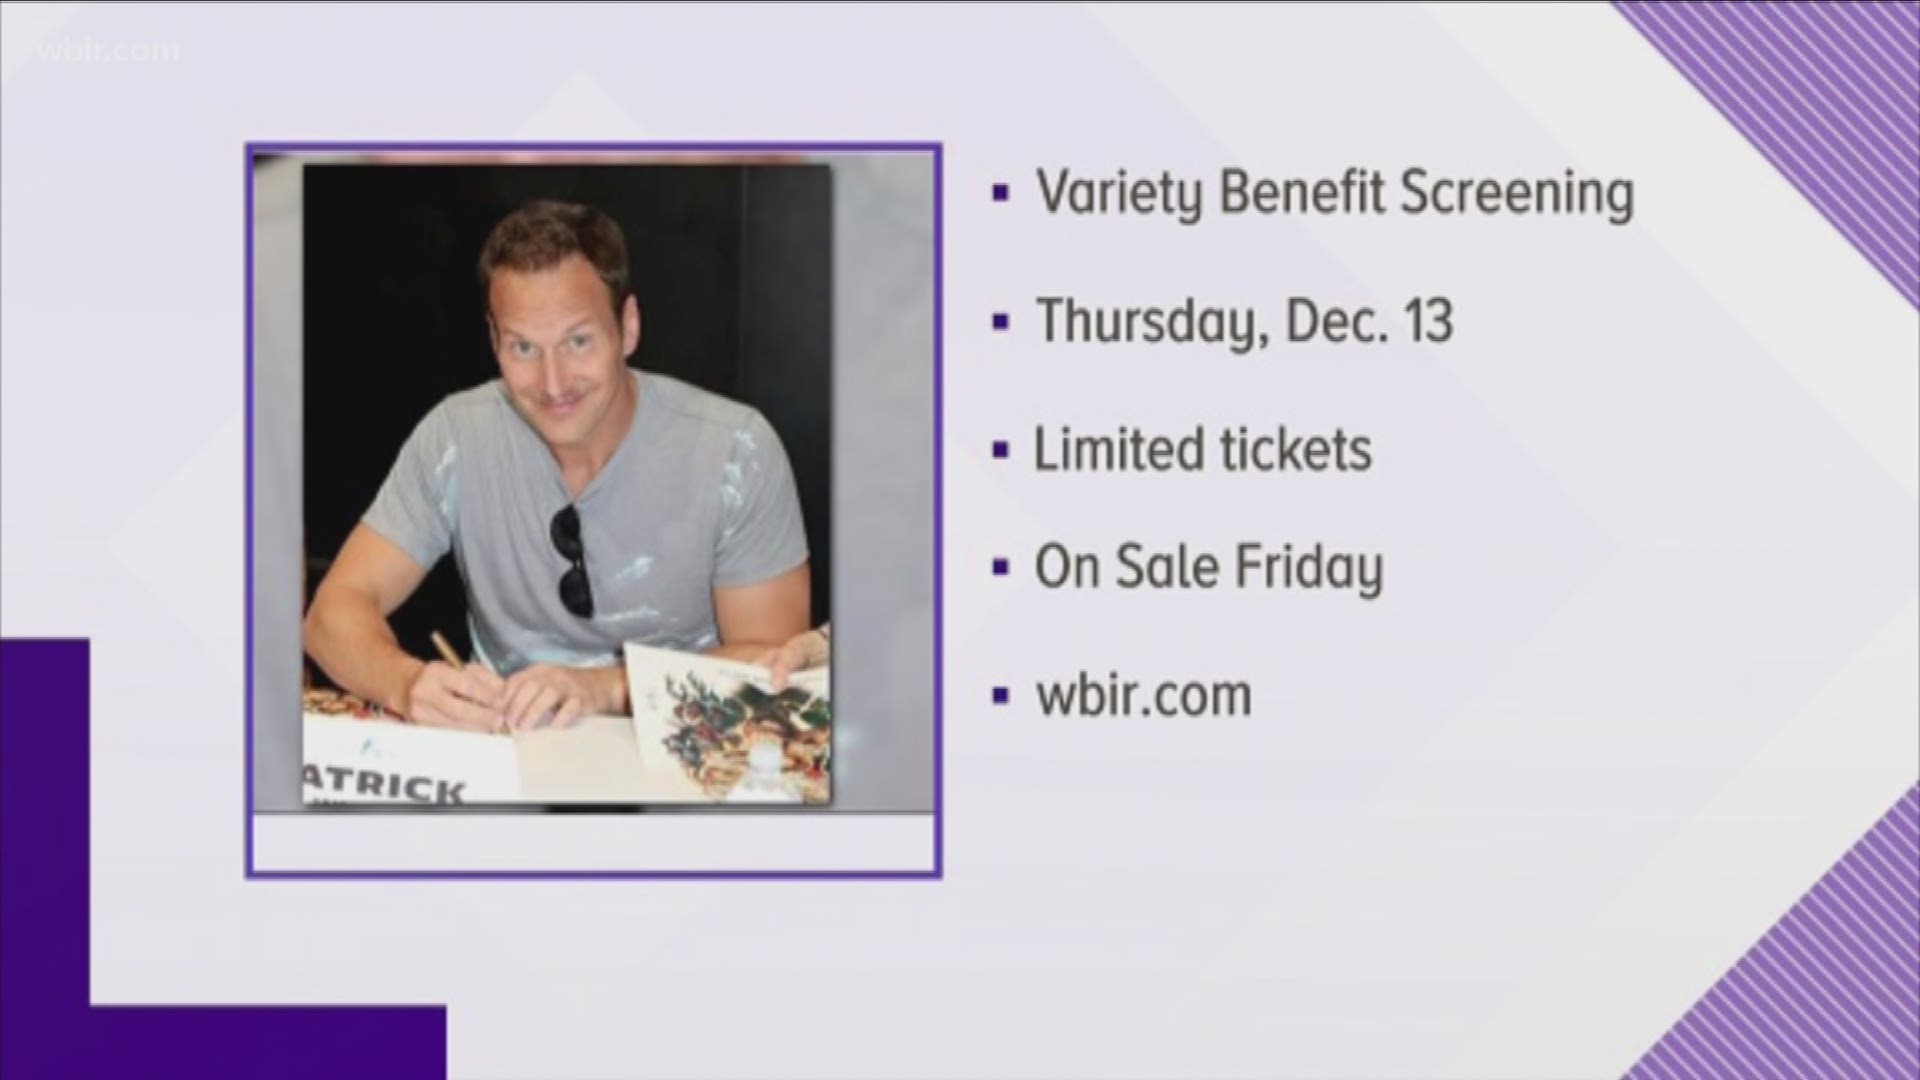 Regal Entertainment announced today that Patrick Wilson will come to Knoxville on Dec. 13 to appear at a benefit screening of the upcoming movie 'Aquaman'. The screening benefits the Variety Children's Charity. Limited tickets go on sale Nov. 16.
Nov. 14,